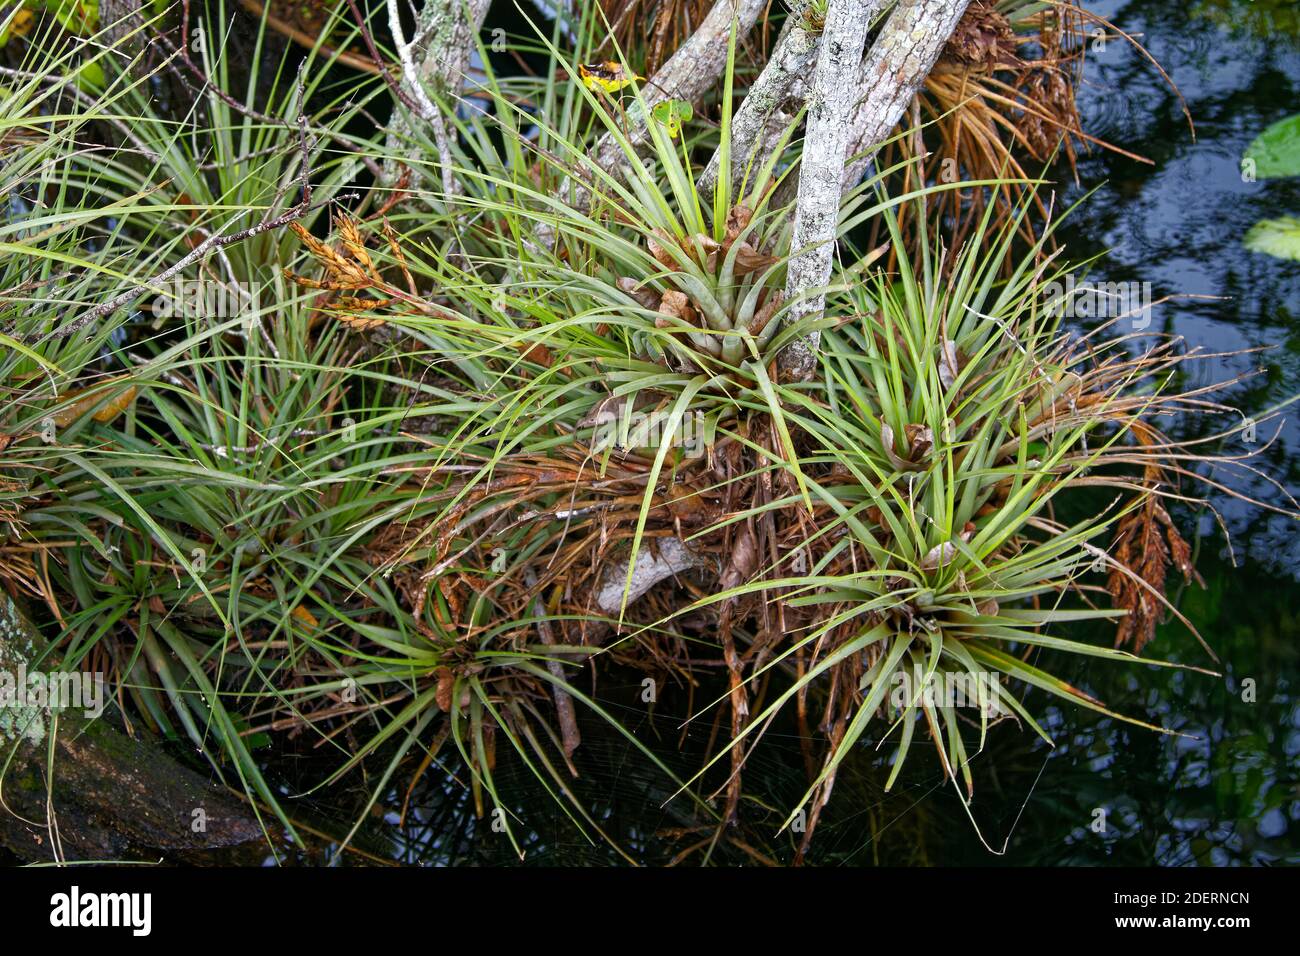 epiphytes, growing in decaying tree, bark, air plants, Tillandsia, nature, Anhinga Trail, Everglades National Park, Florida, Everglades National Park, Stock Photo